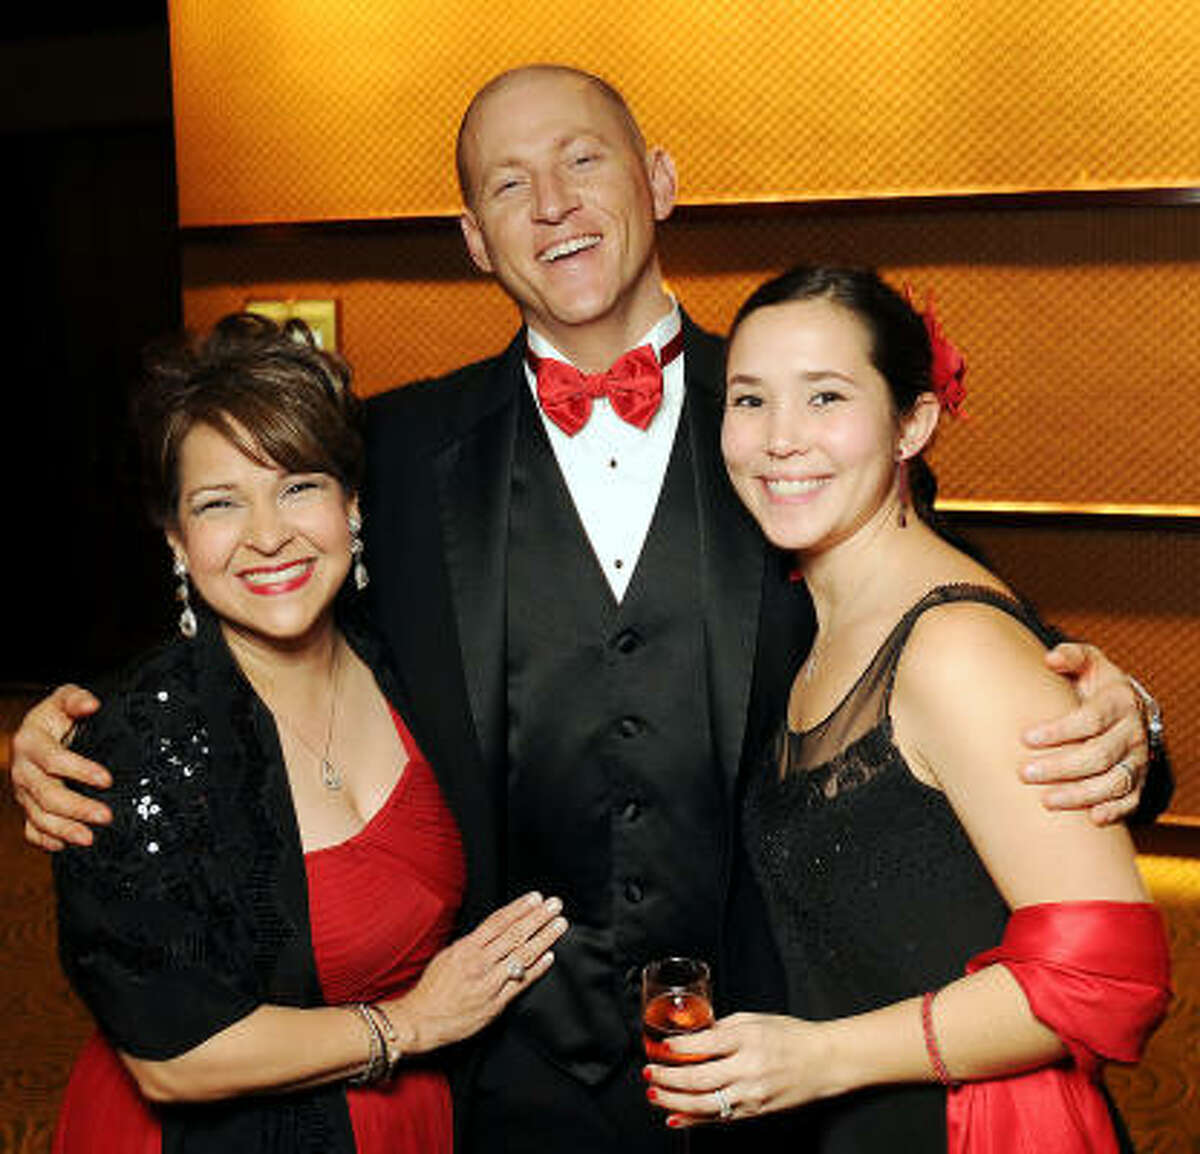 From left: Mary Bergeron with Frank and Lauren Sosa